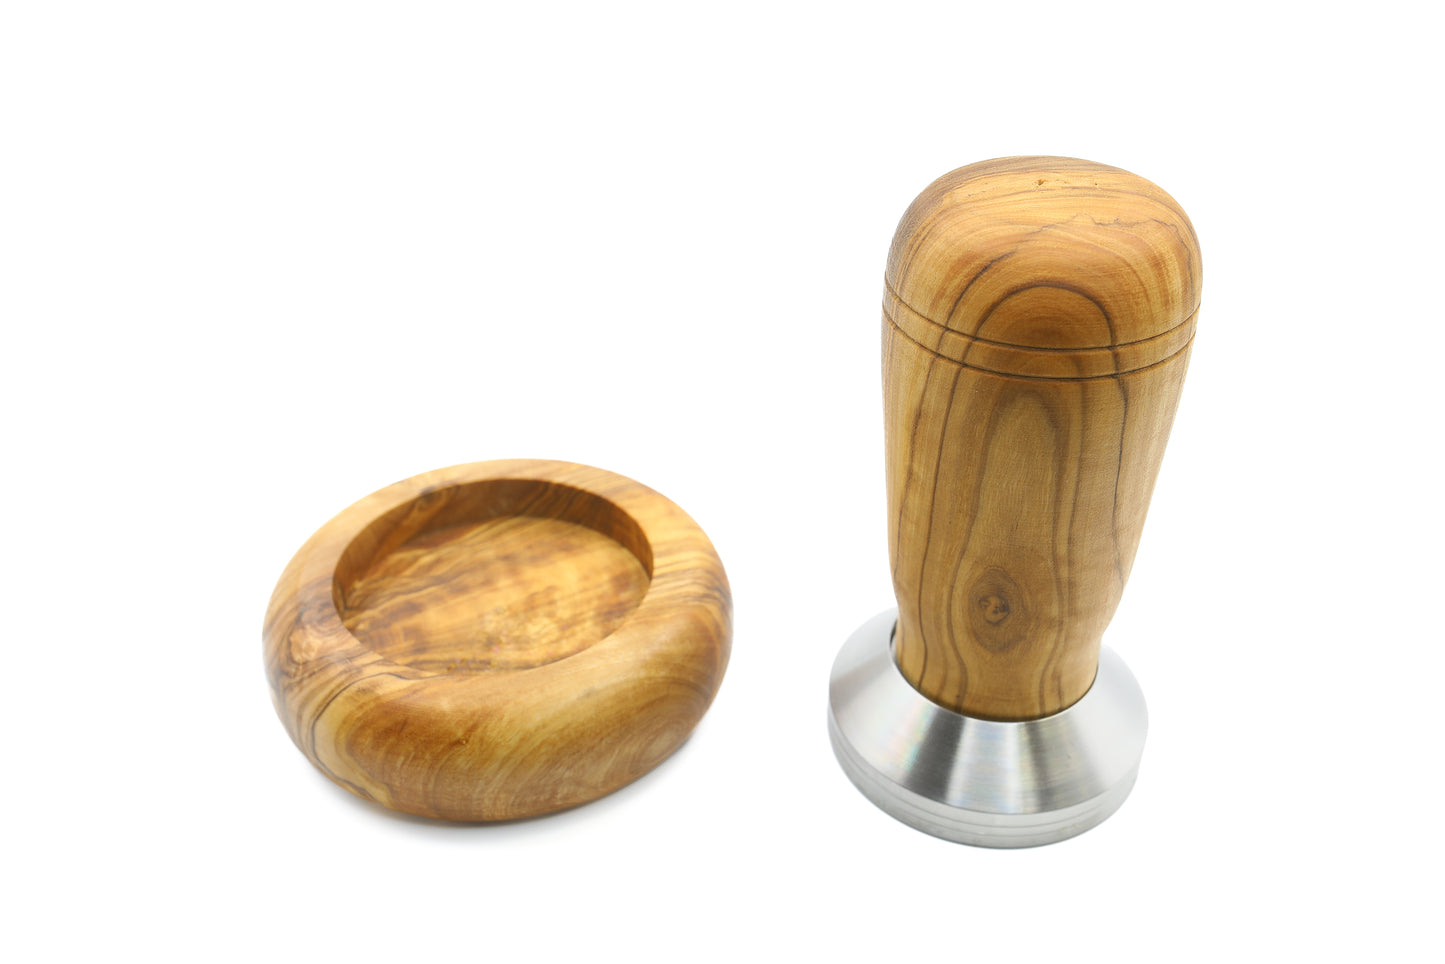 Olive wood and stainless steel tamper with a holder, an eco-conscious choice for espresso